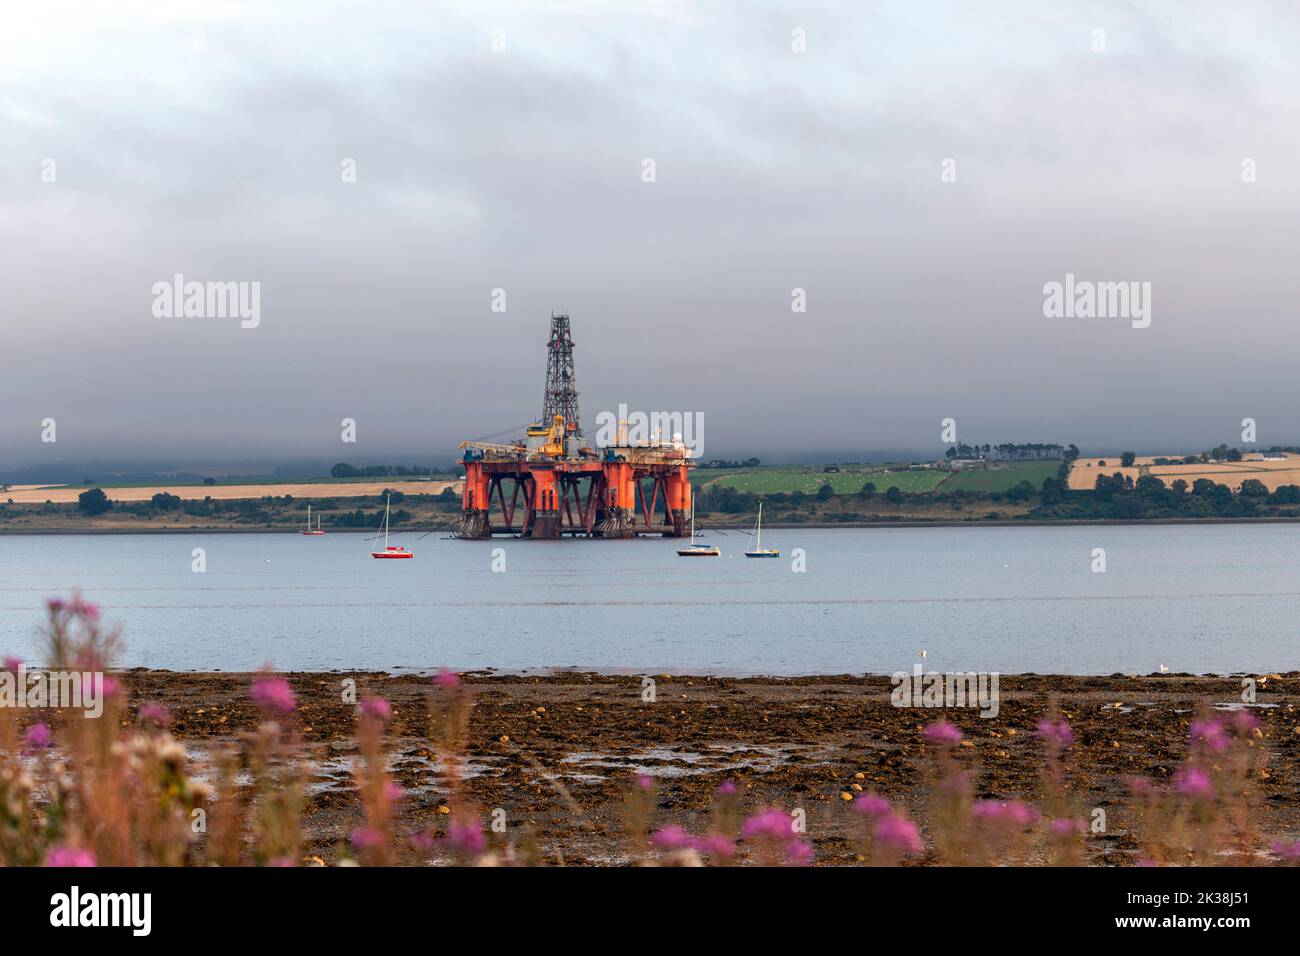 Oil rig moored in the Cromarty Firth, nvergordon, Easter Ross, in Ross and Cromarty, Highland, Scotland, UK Stock Photo